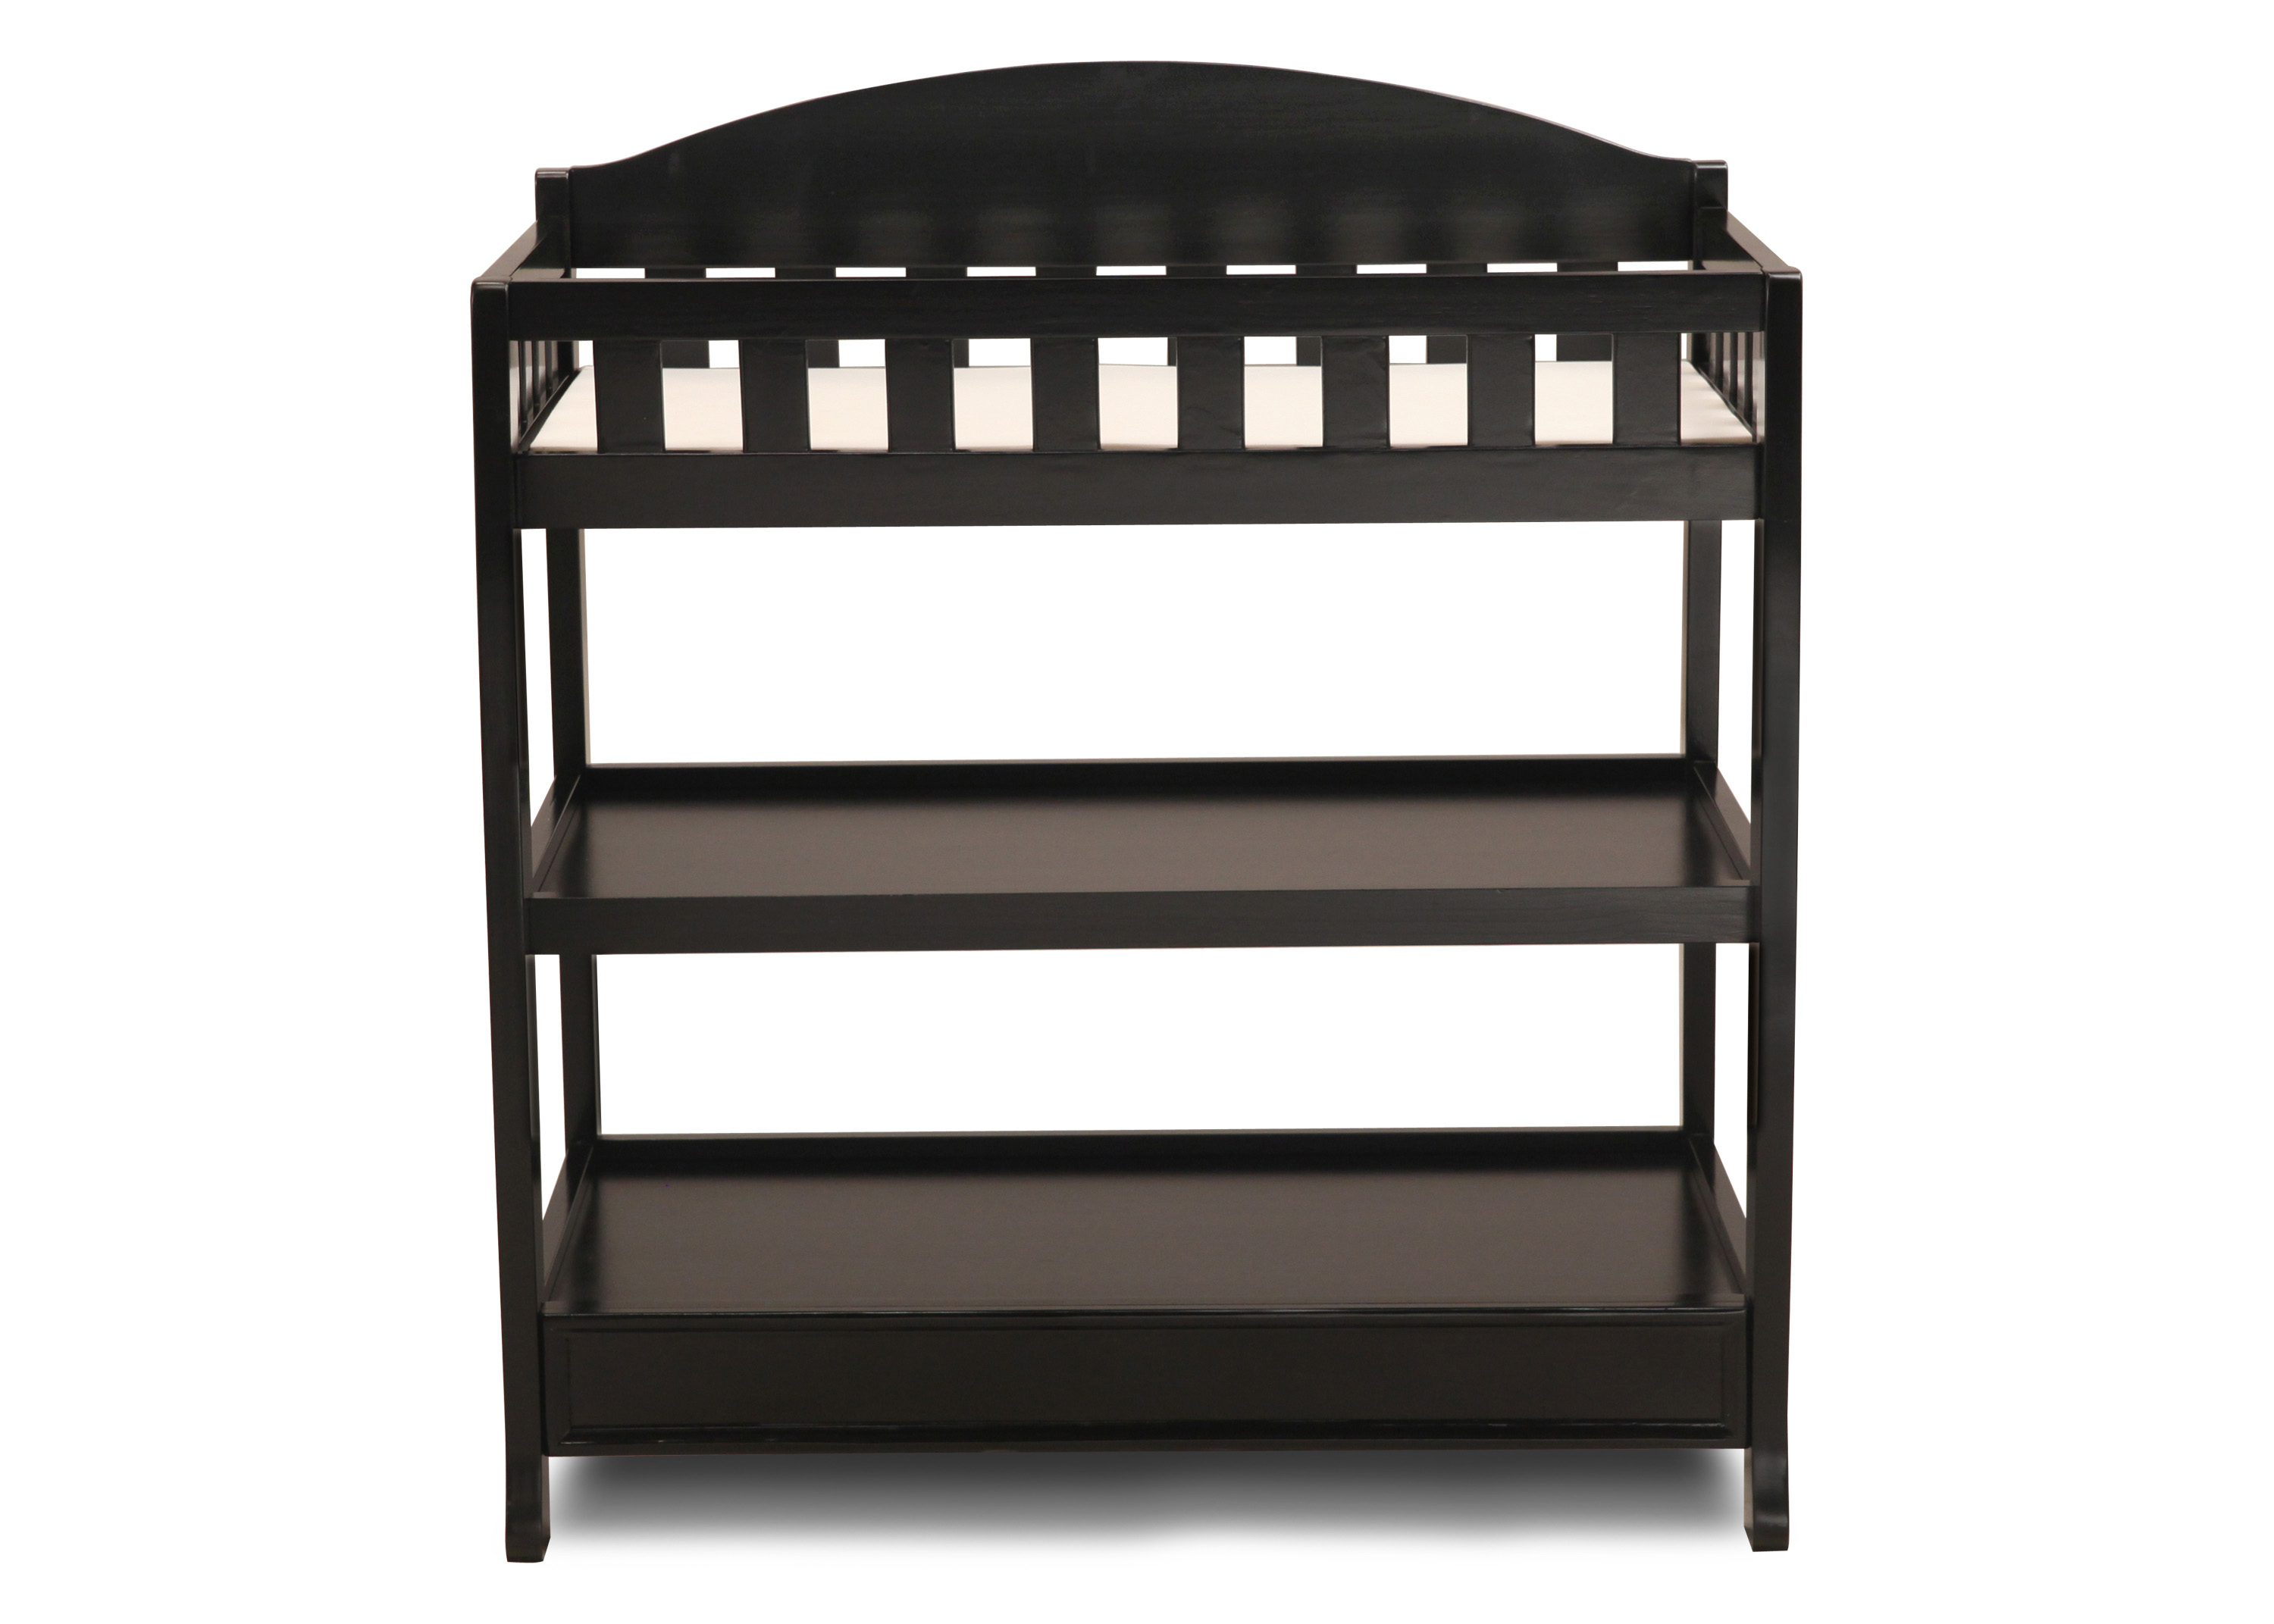 Delta Children Wilmington Changing Table with Pad, Ebony Black - image 4 of 8